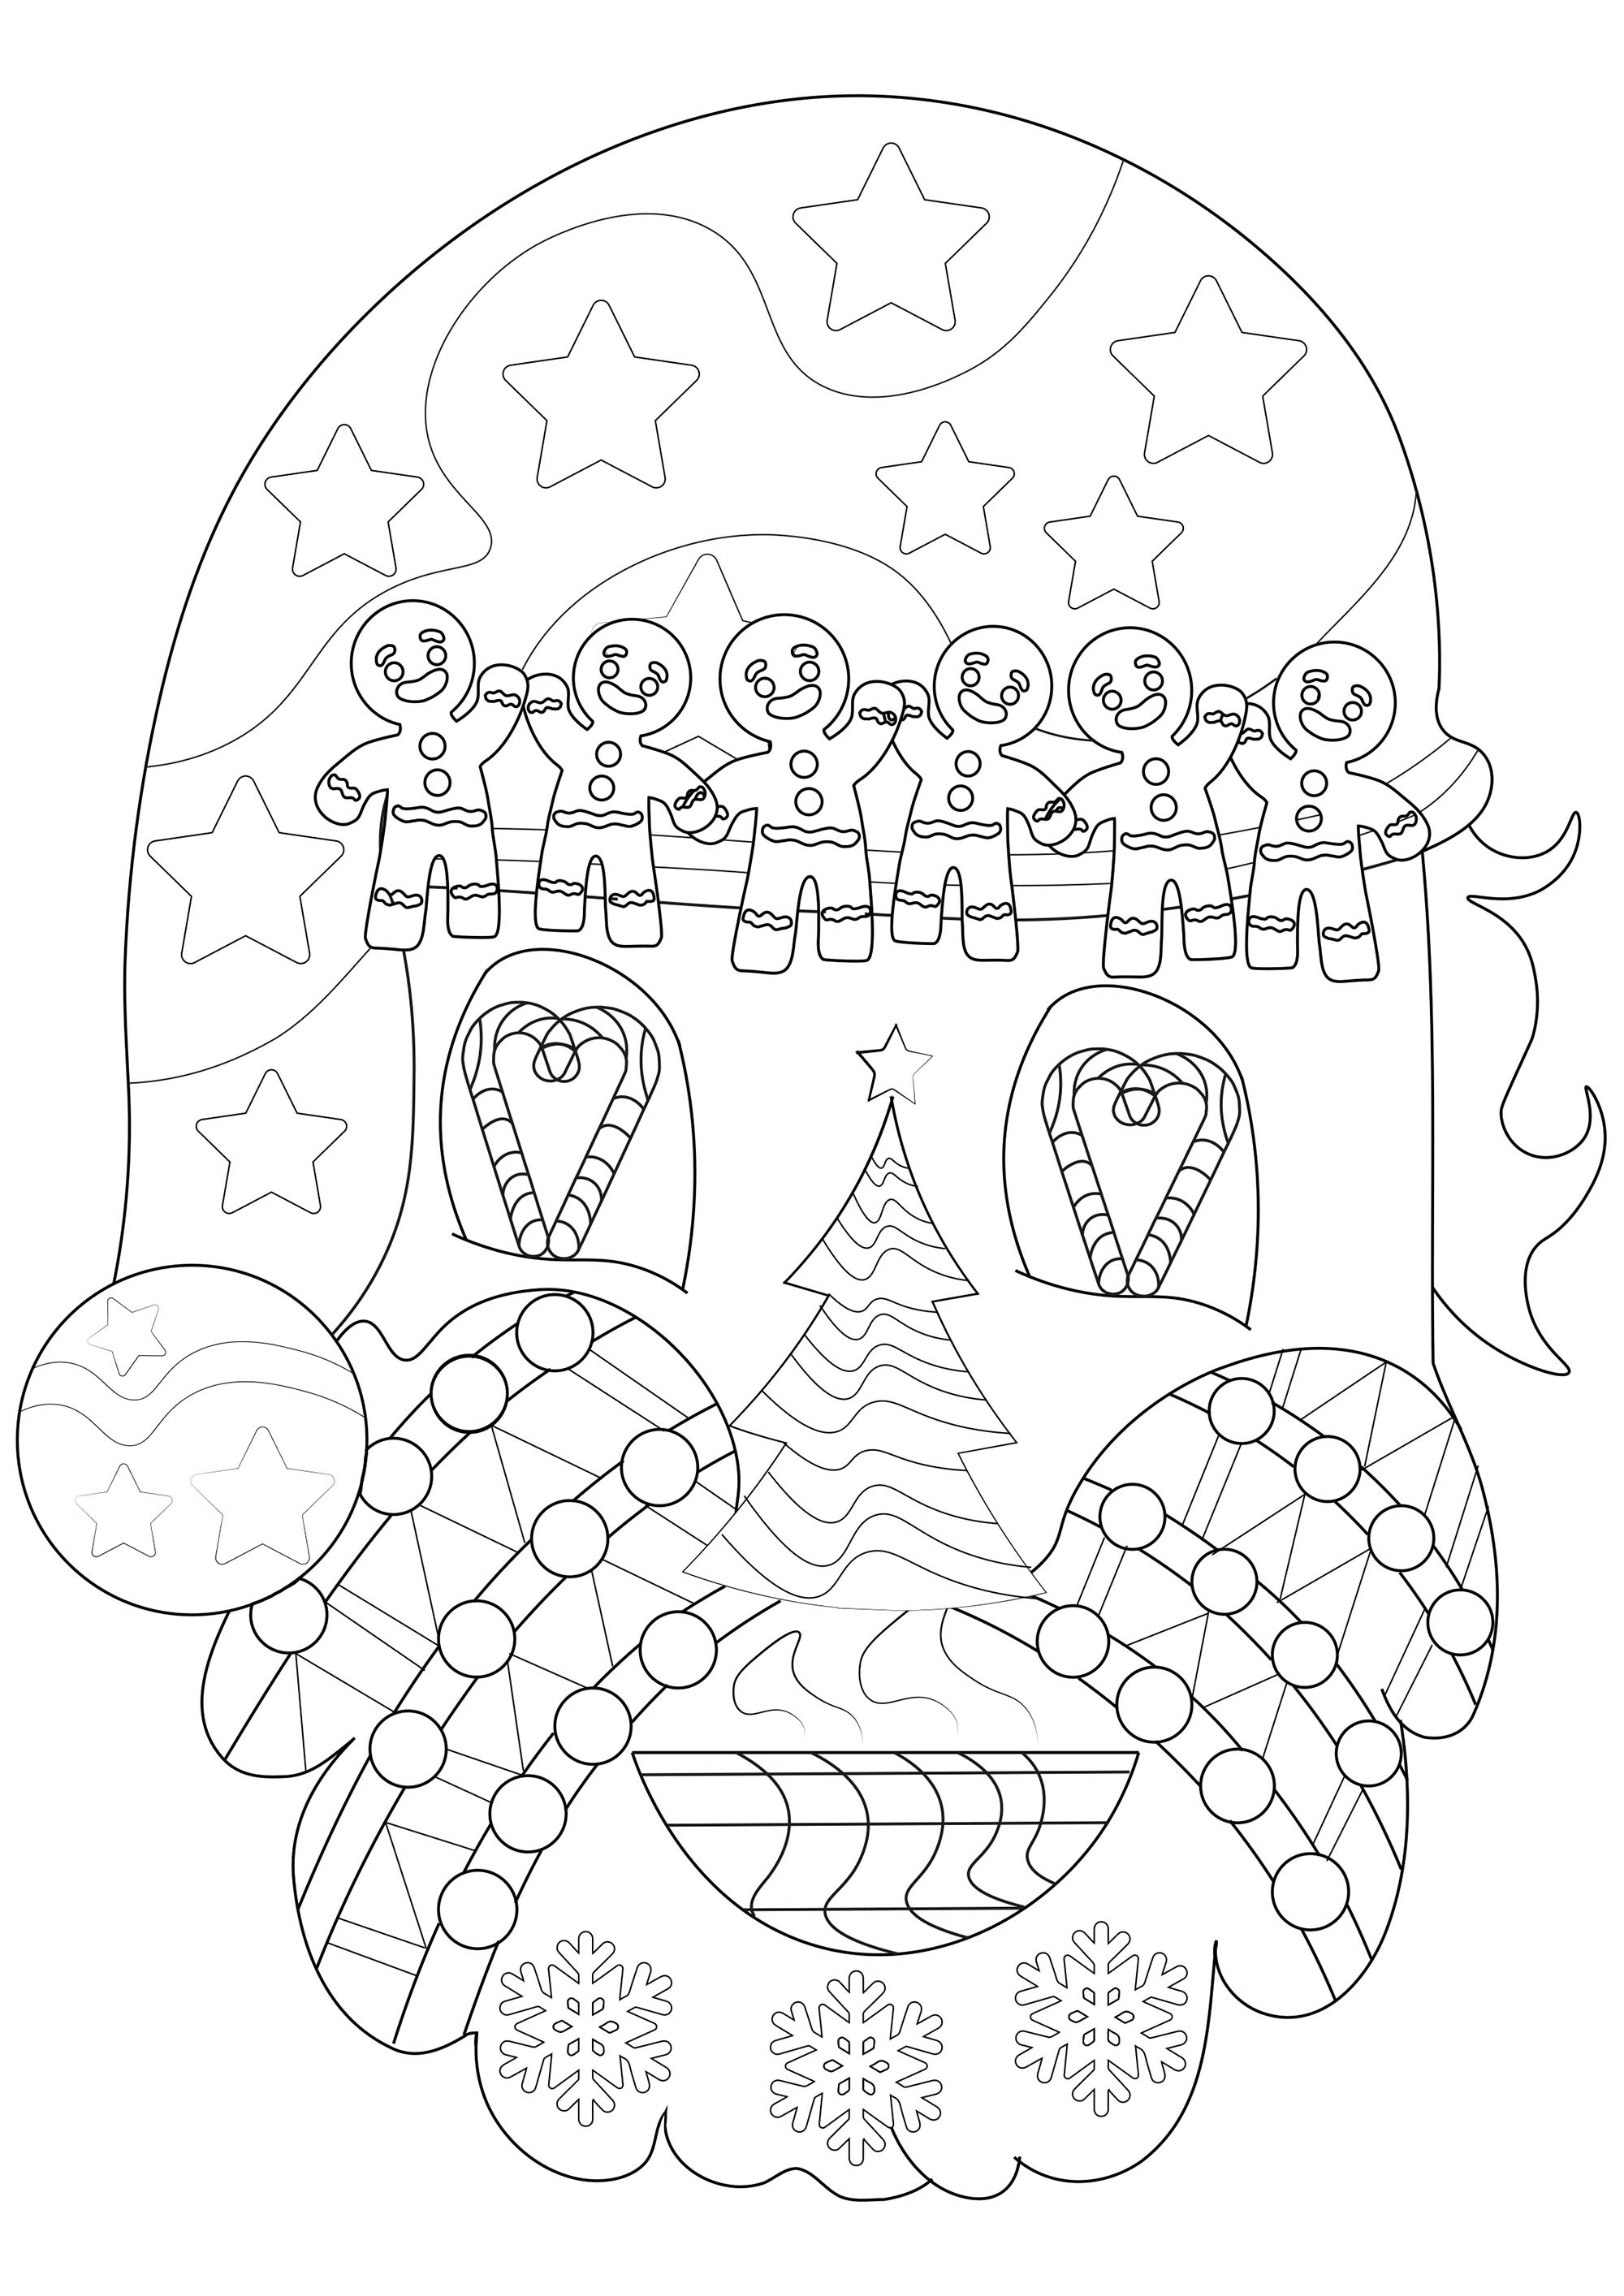 Santa Claus coloring page for kids, with lots of Christmas motifs in his face